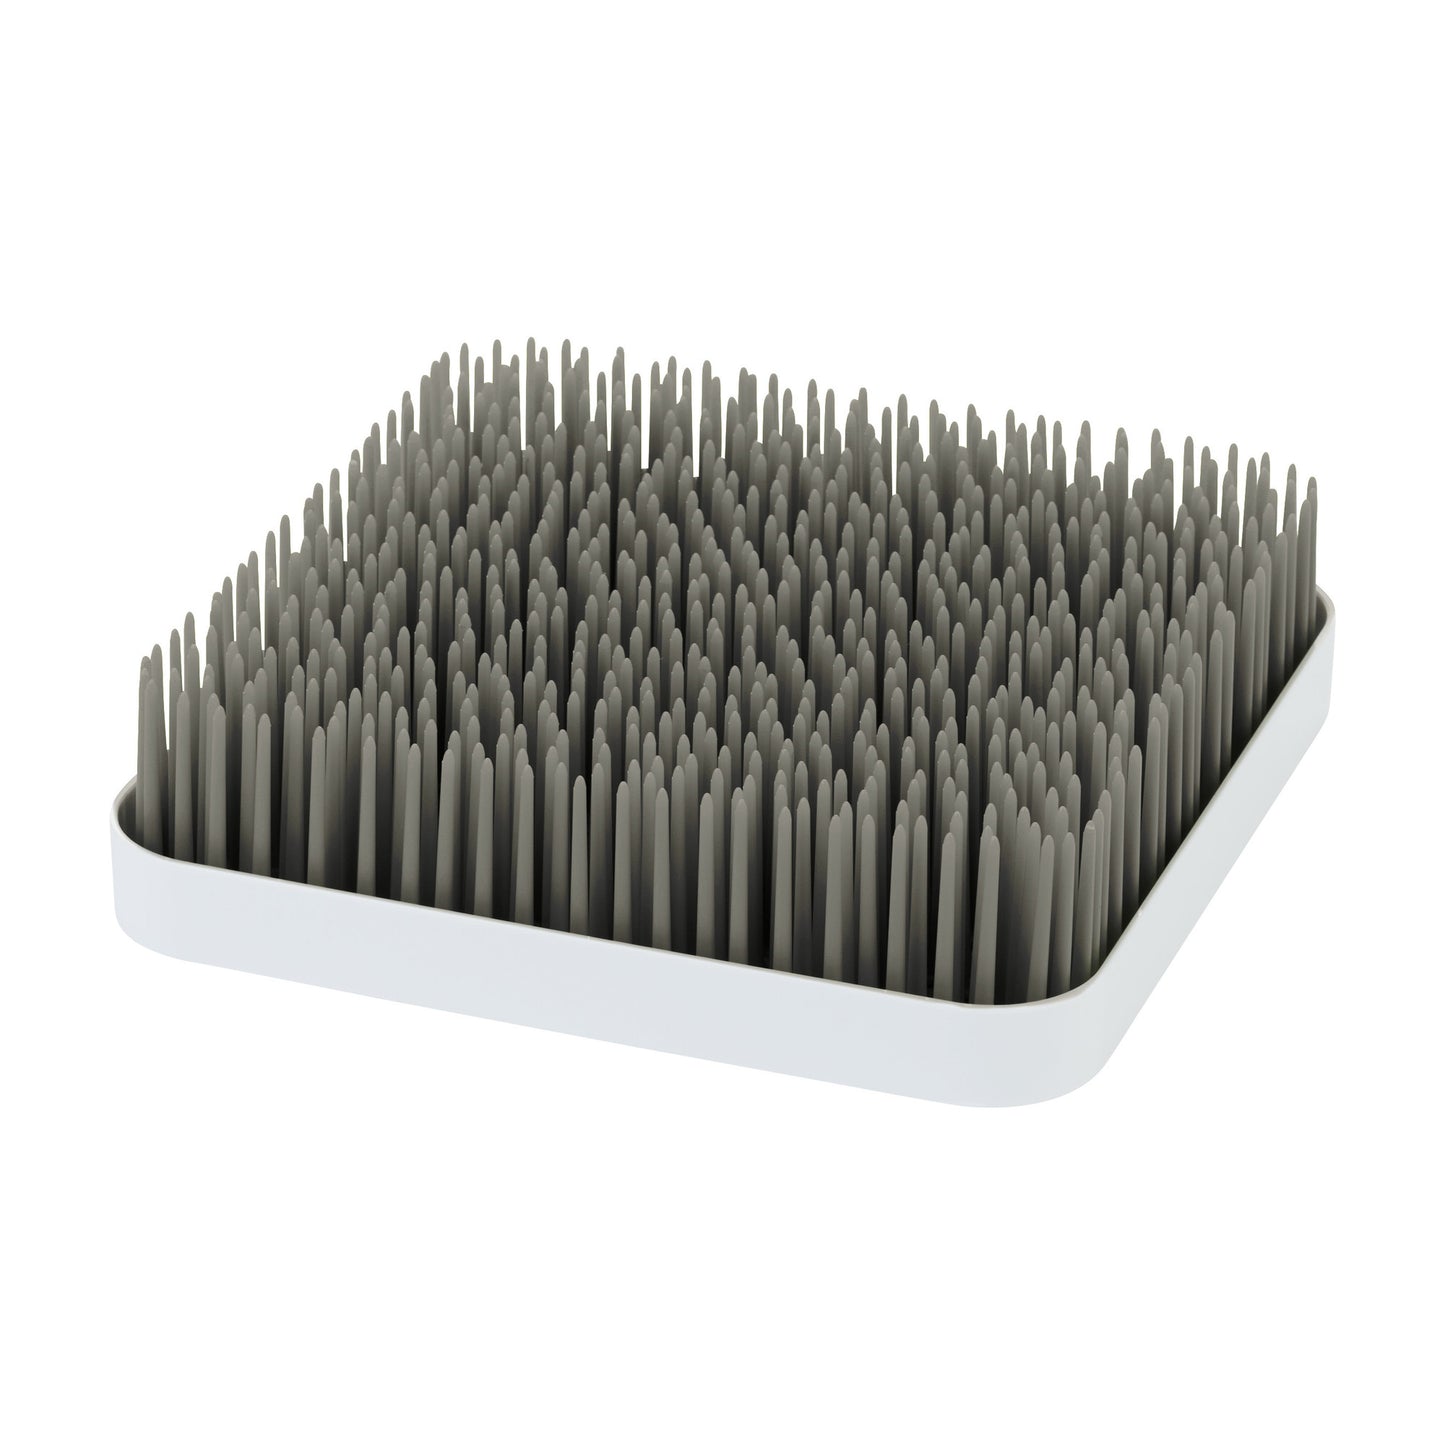 Boon GRASS Drying Rack Grey at Baby City